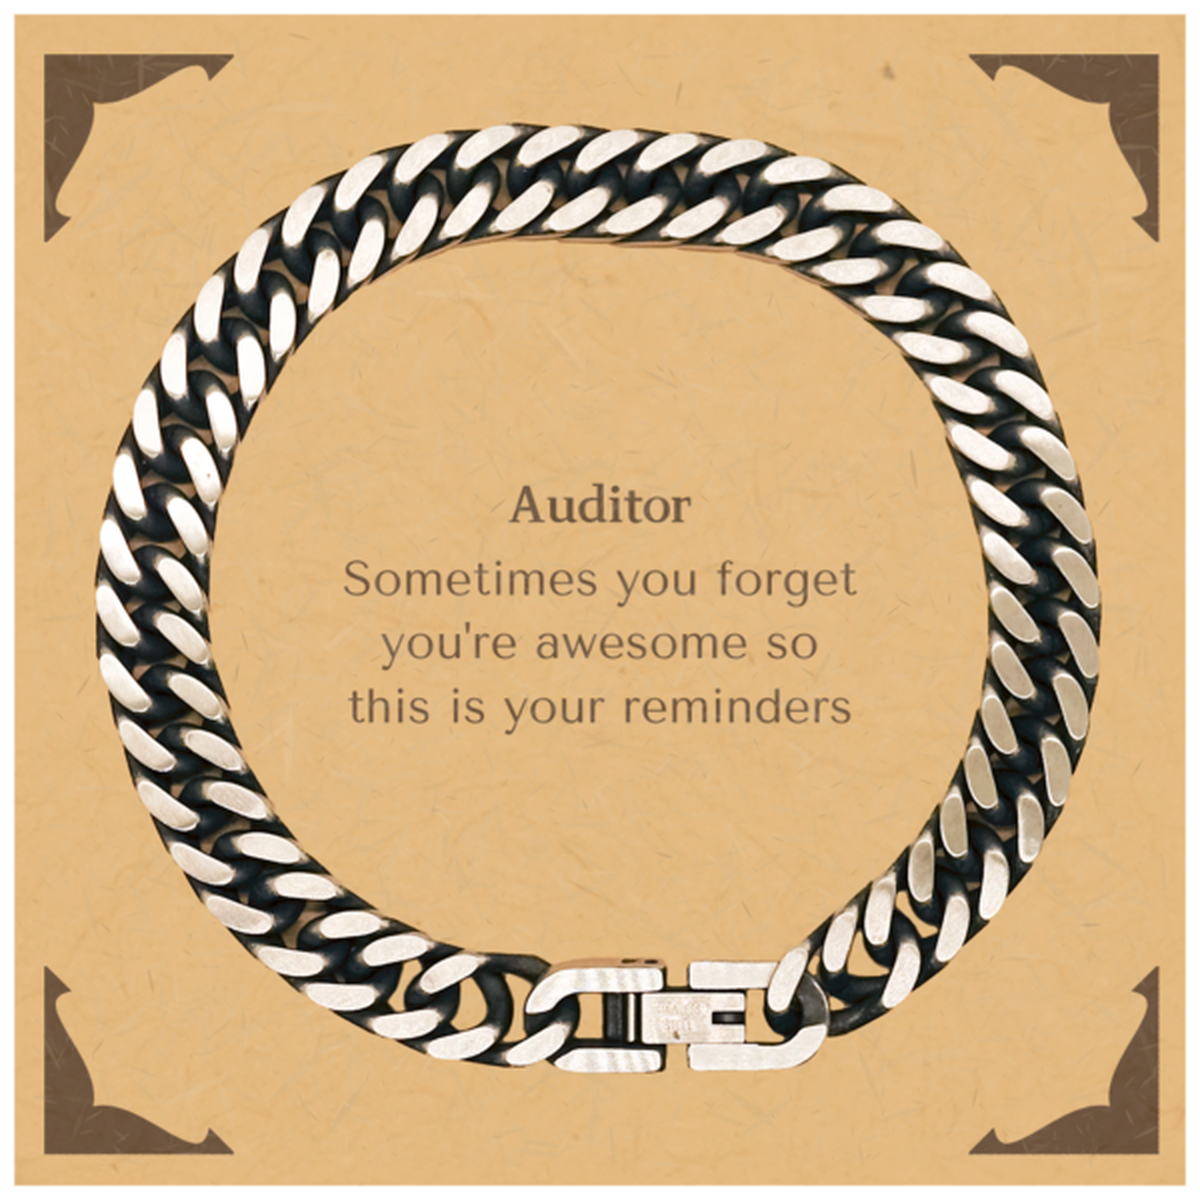 Sentimental Auditor Cuban Link Chain Bracelet, Auditor Sometimes you forget you're awesome so this is your reminders, Graduation Christmas Birthday Gifts for Auditor, Men, Women, Coworkers